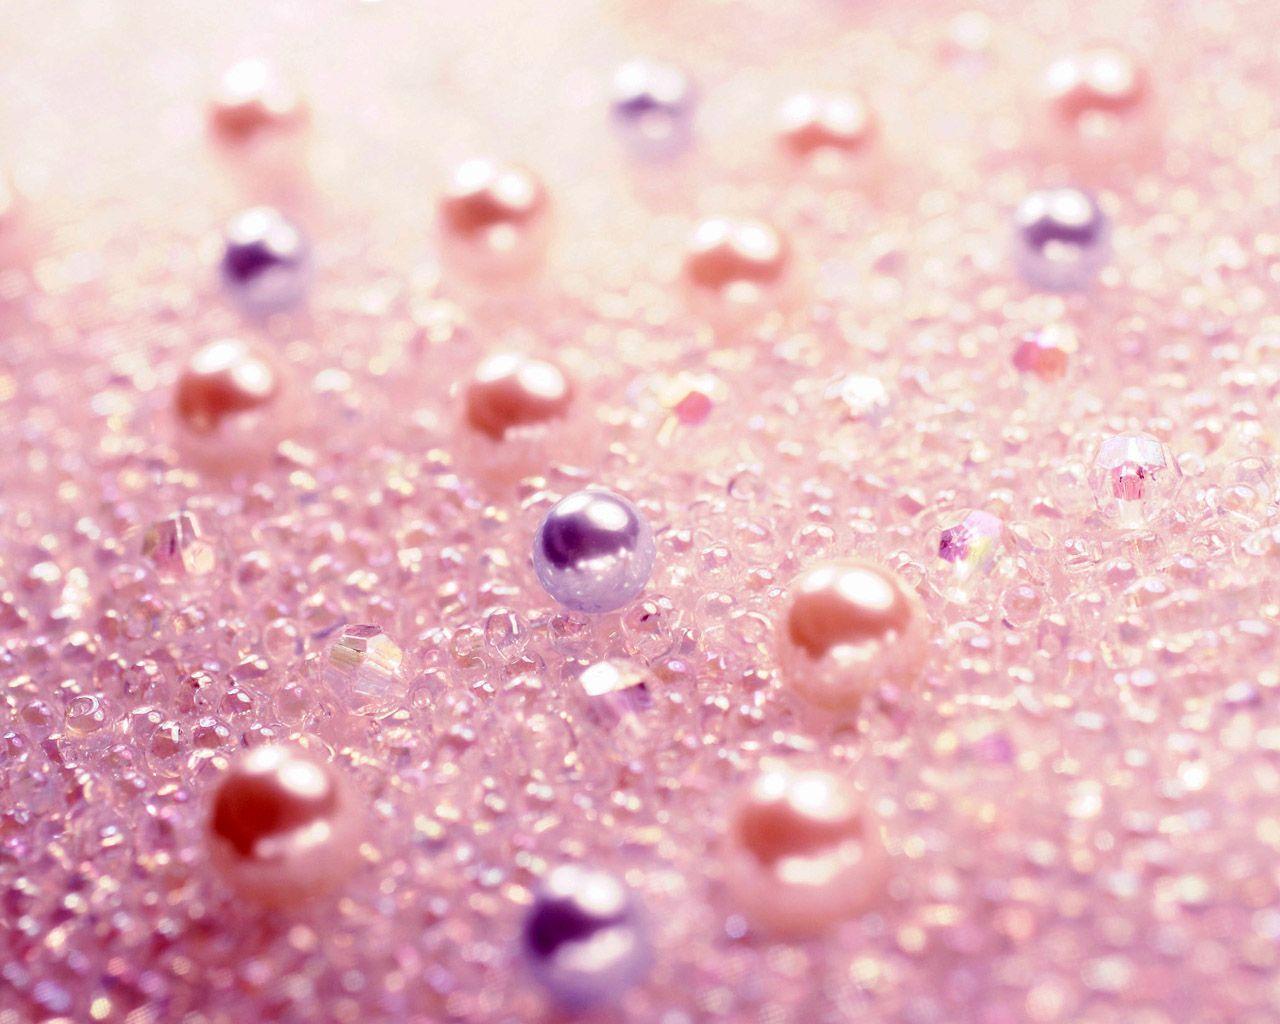 81,652 Pink Pearl Background Images, Stock Photos & Vectors | Shutterstock